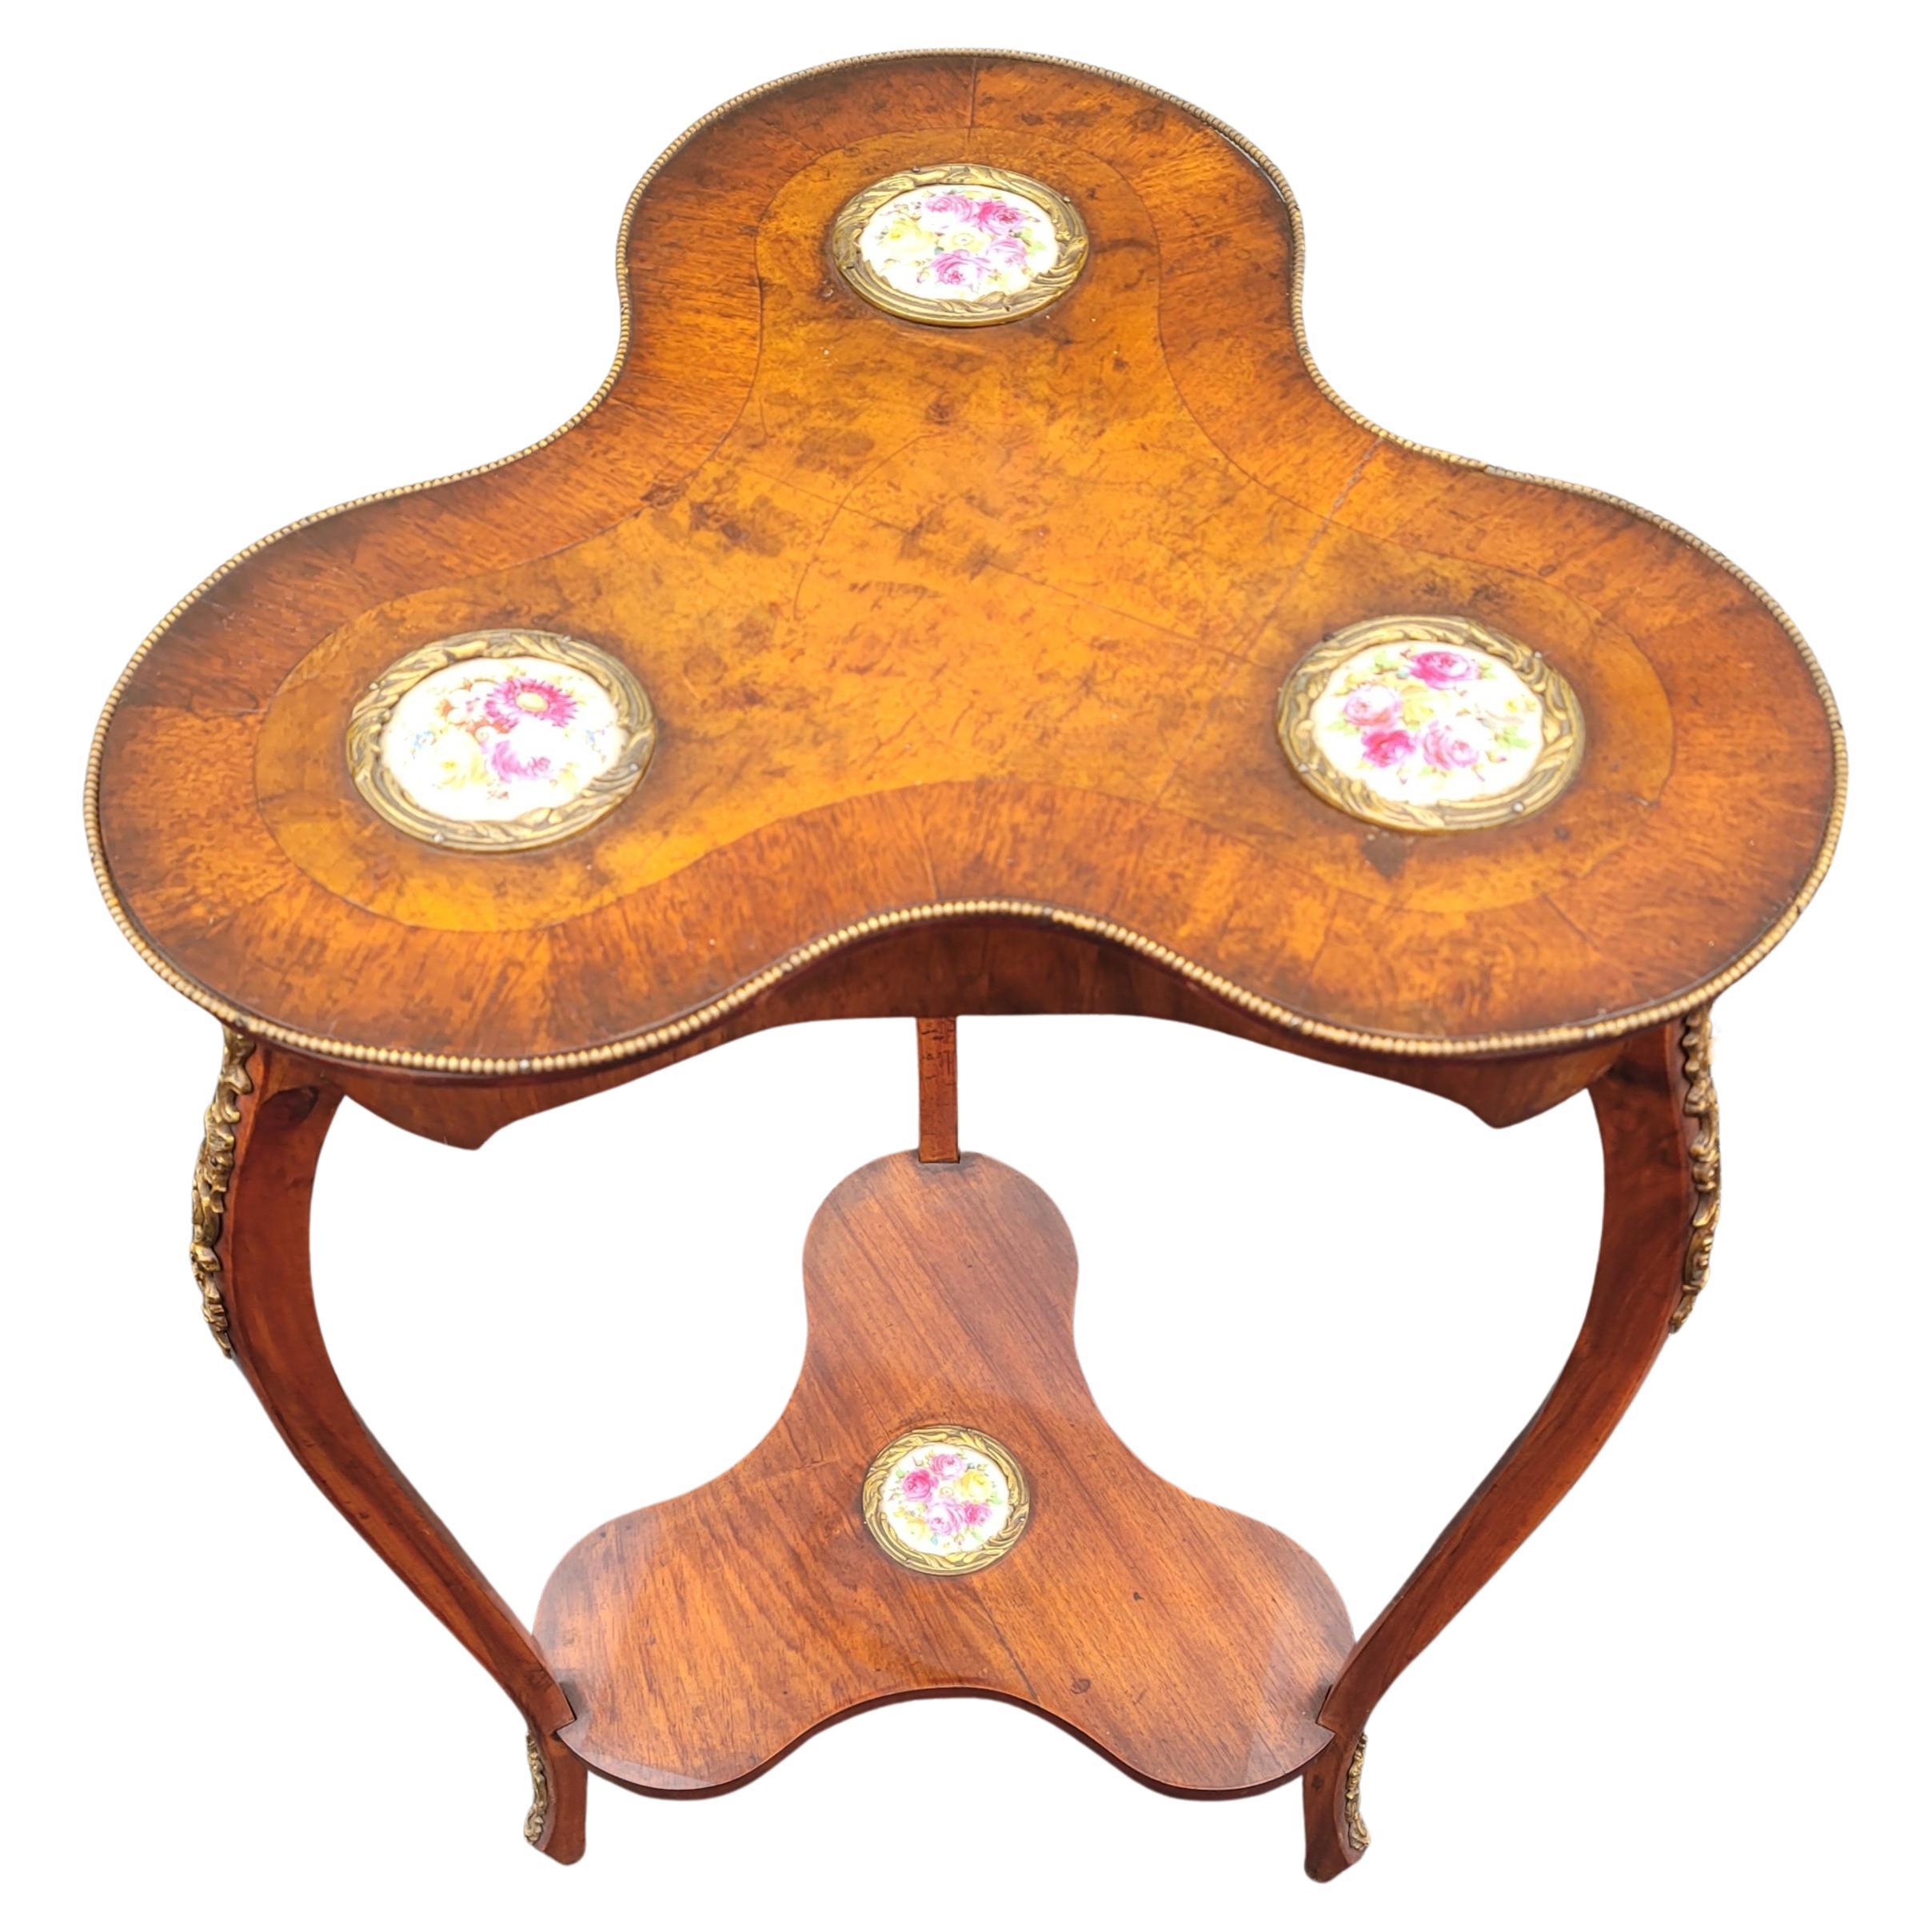 A unique 1920s Louis XV Style Ormolu & Porcelain insets Burled Walnut Trefoil Side Table with 4 individually designed porcelain insets. 
Measures 18